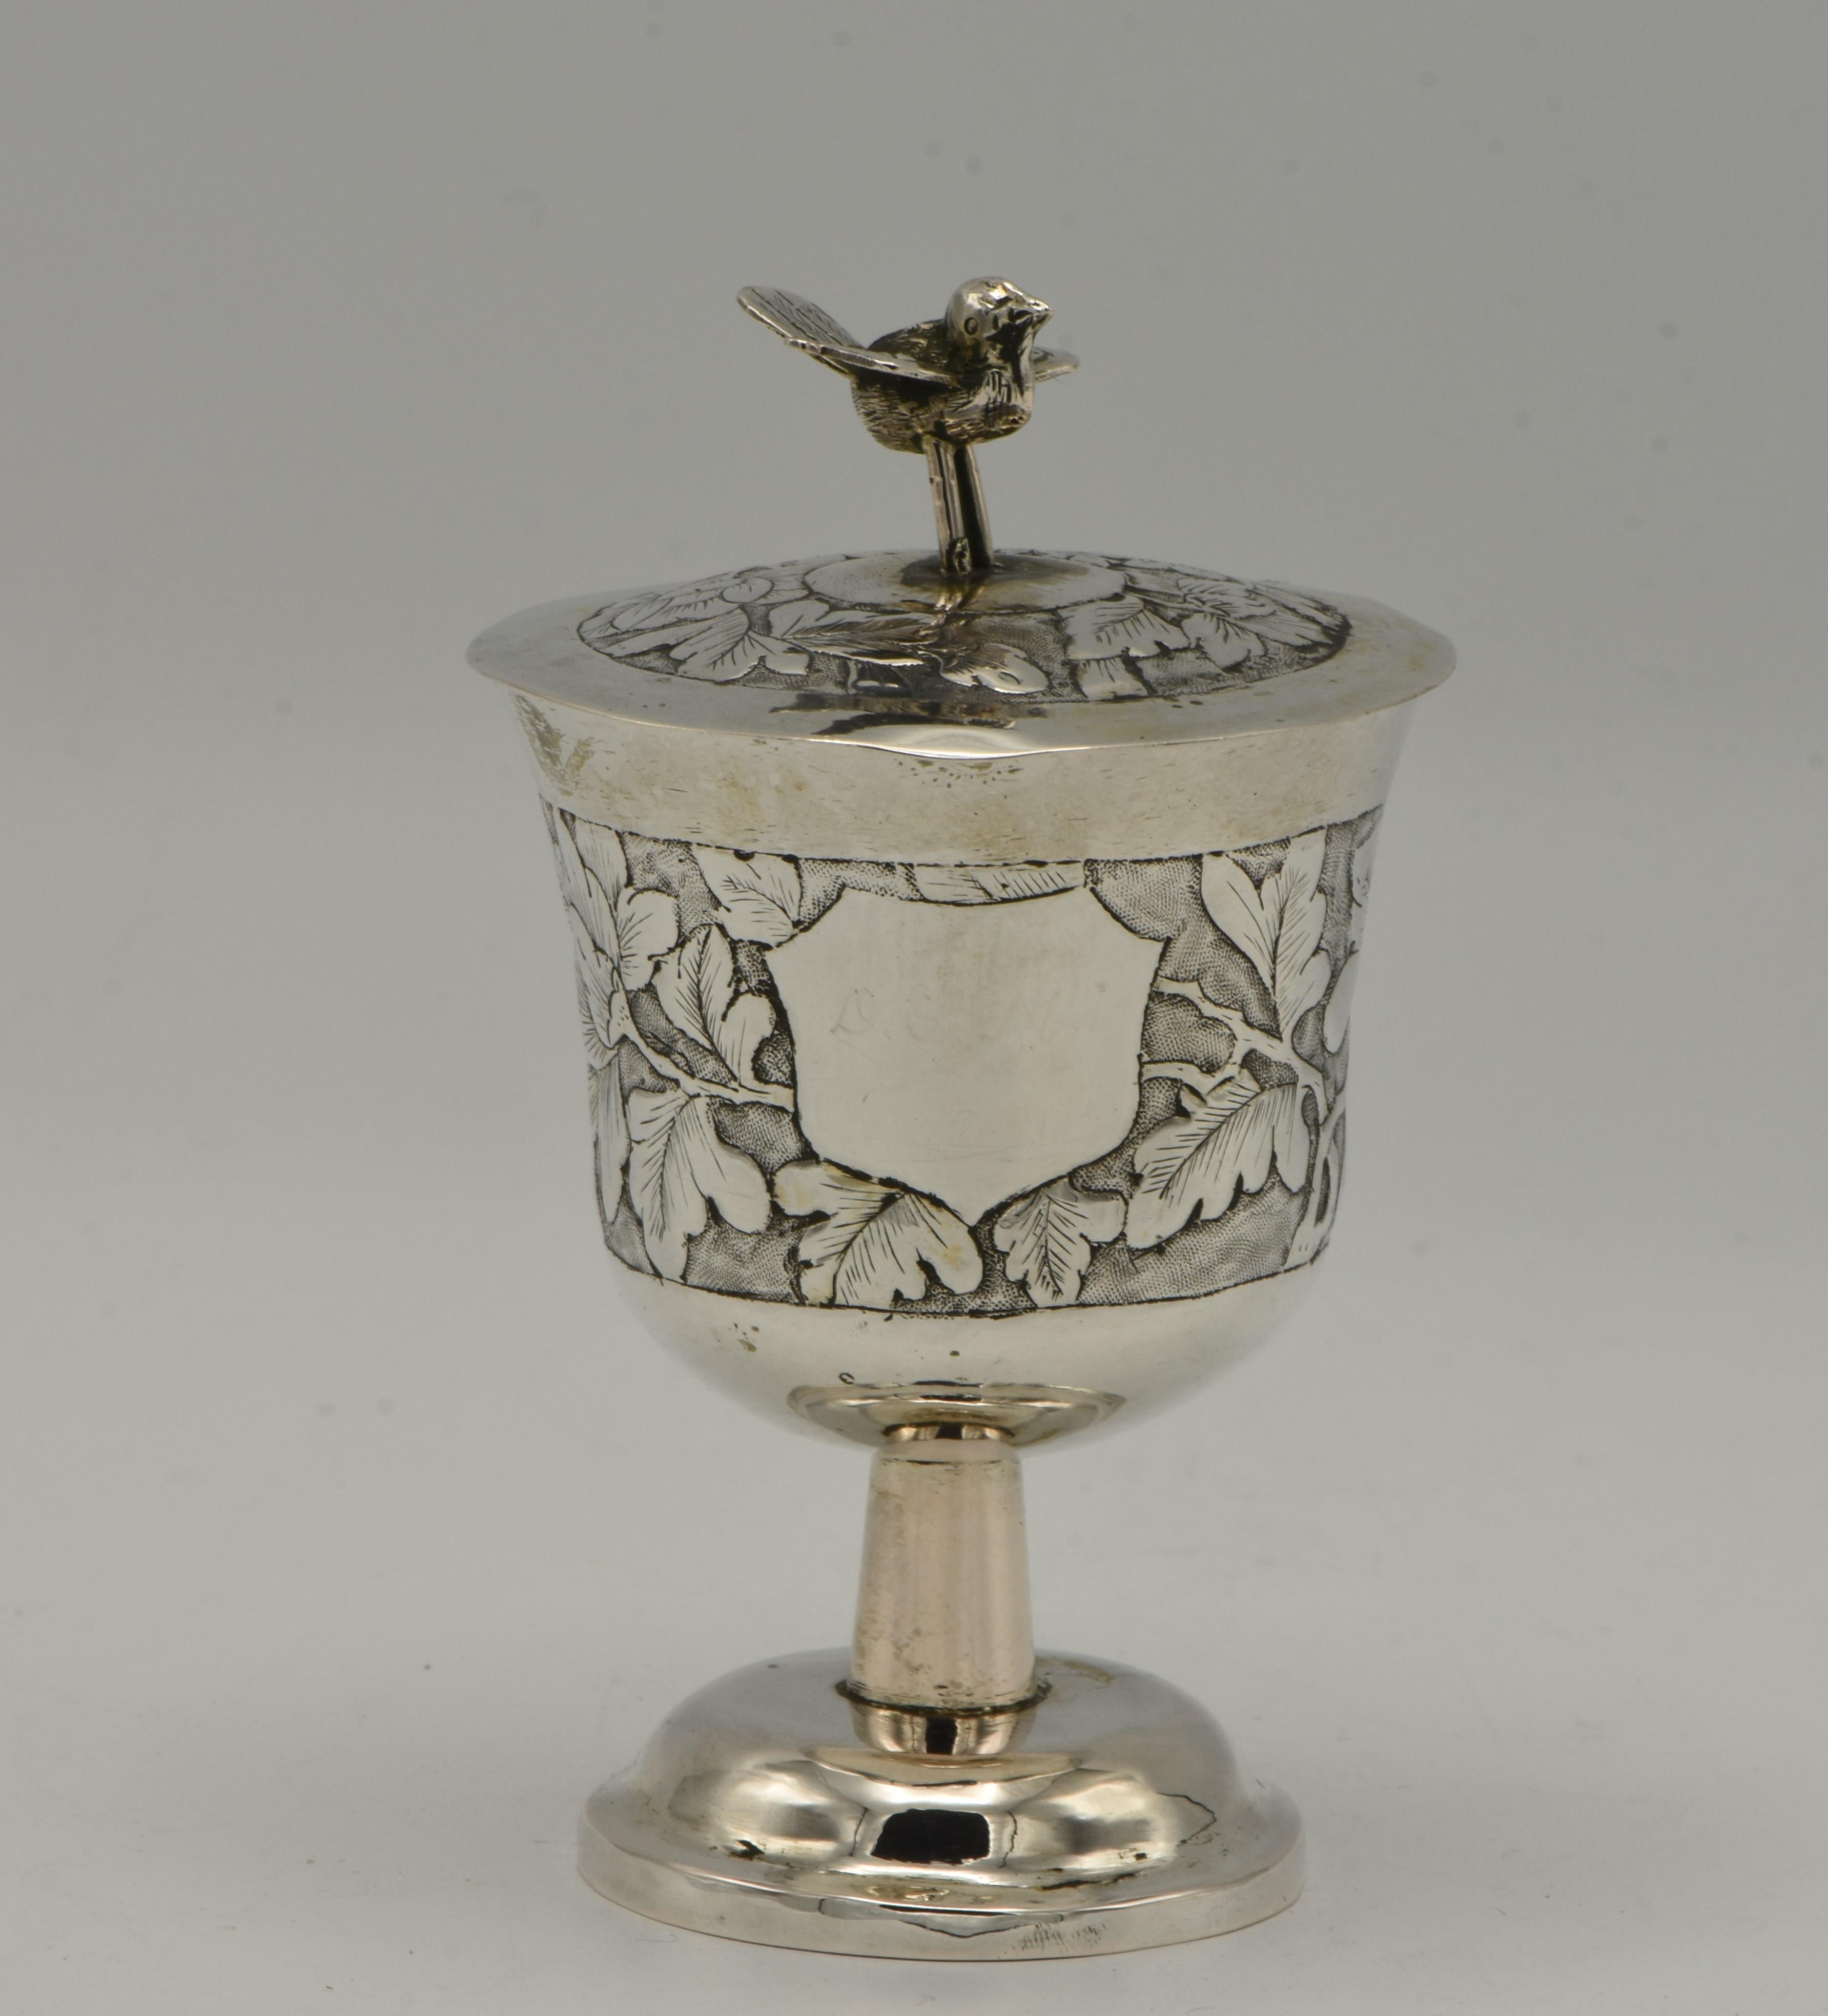 Chinese export silver covered Kiddush goblet, 19th century. 
Round cup on a stem mounted to a flat circular foot. Stepped domed cover with bird finial. With repoussé scrolled floral decoration on chased ground. Bearing cartouche in the middle of the